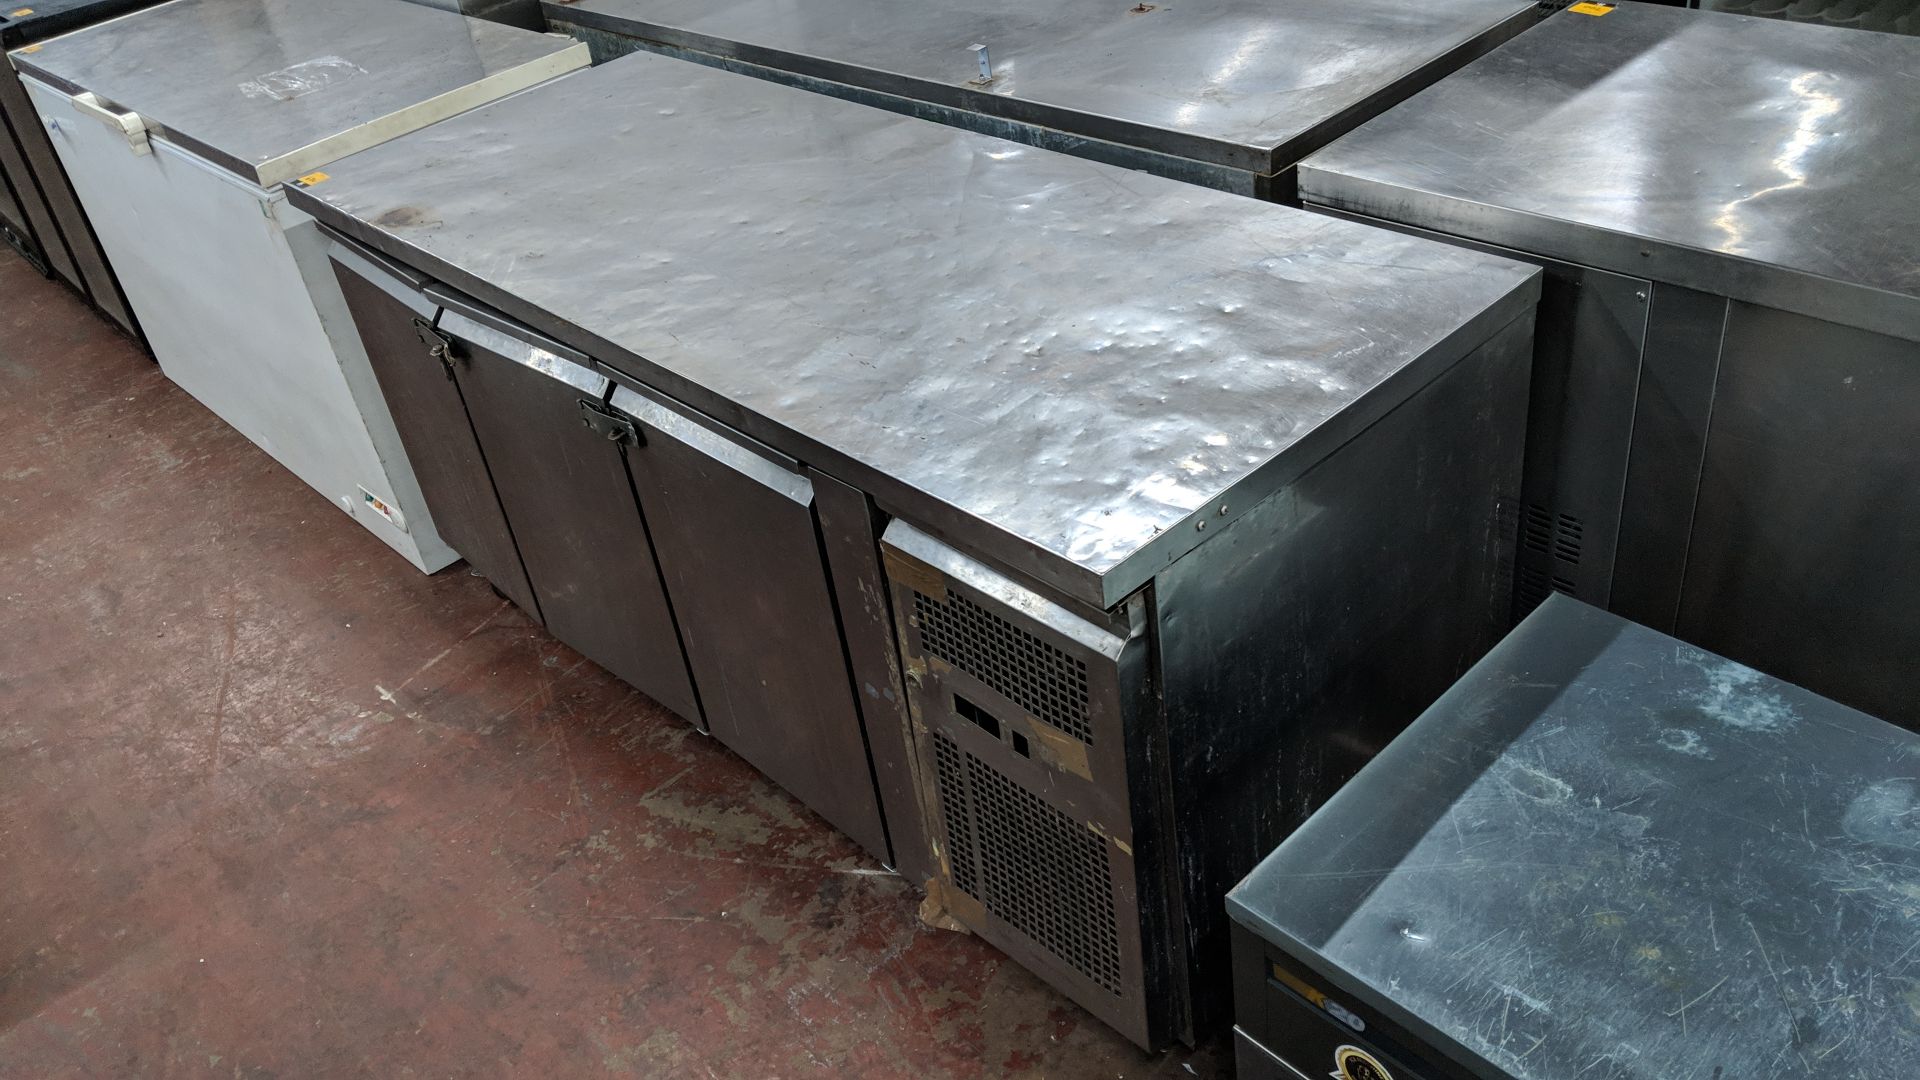 Stainless steel refrigerated prep cabinet IMPORTANT: Please remember goods successfully bid upon - Image 2 of 4